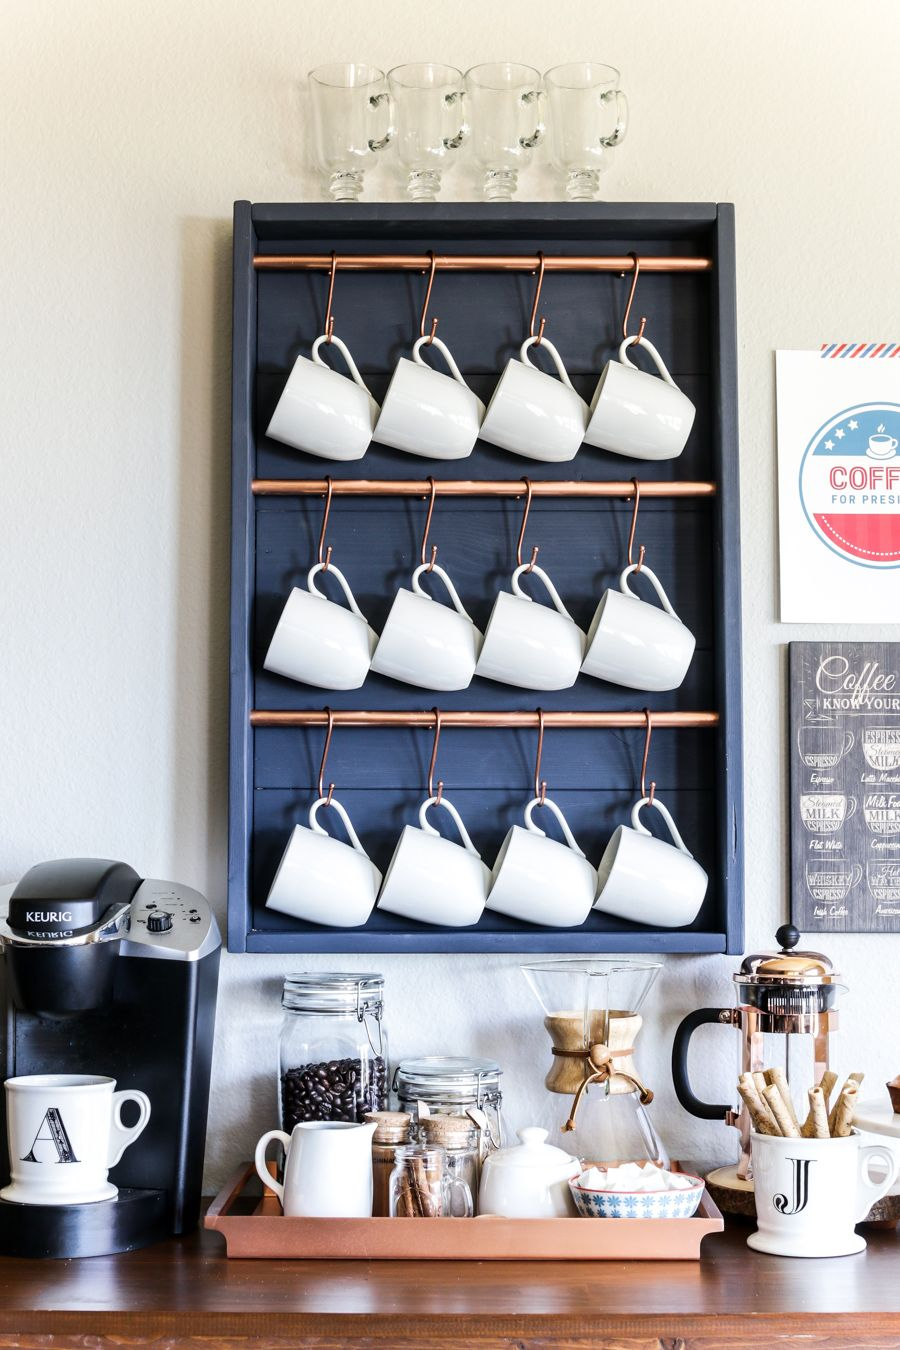 7 DIY Coffee Bar Ideas For Your Home